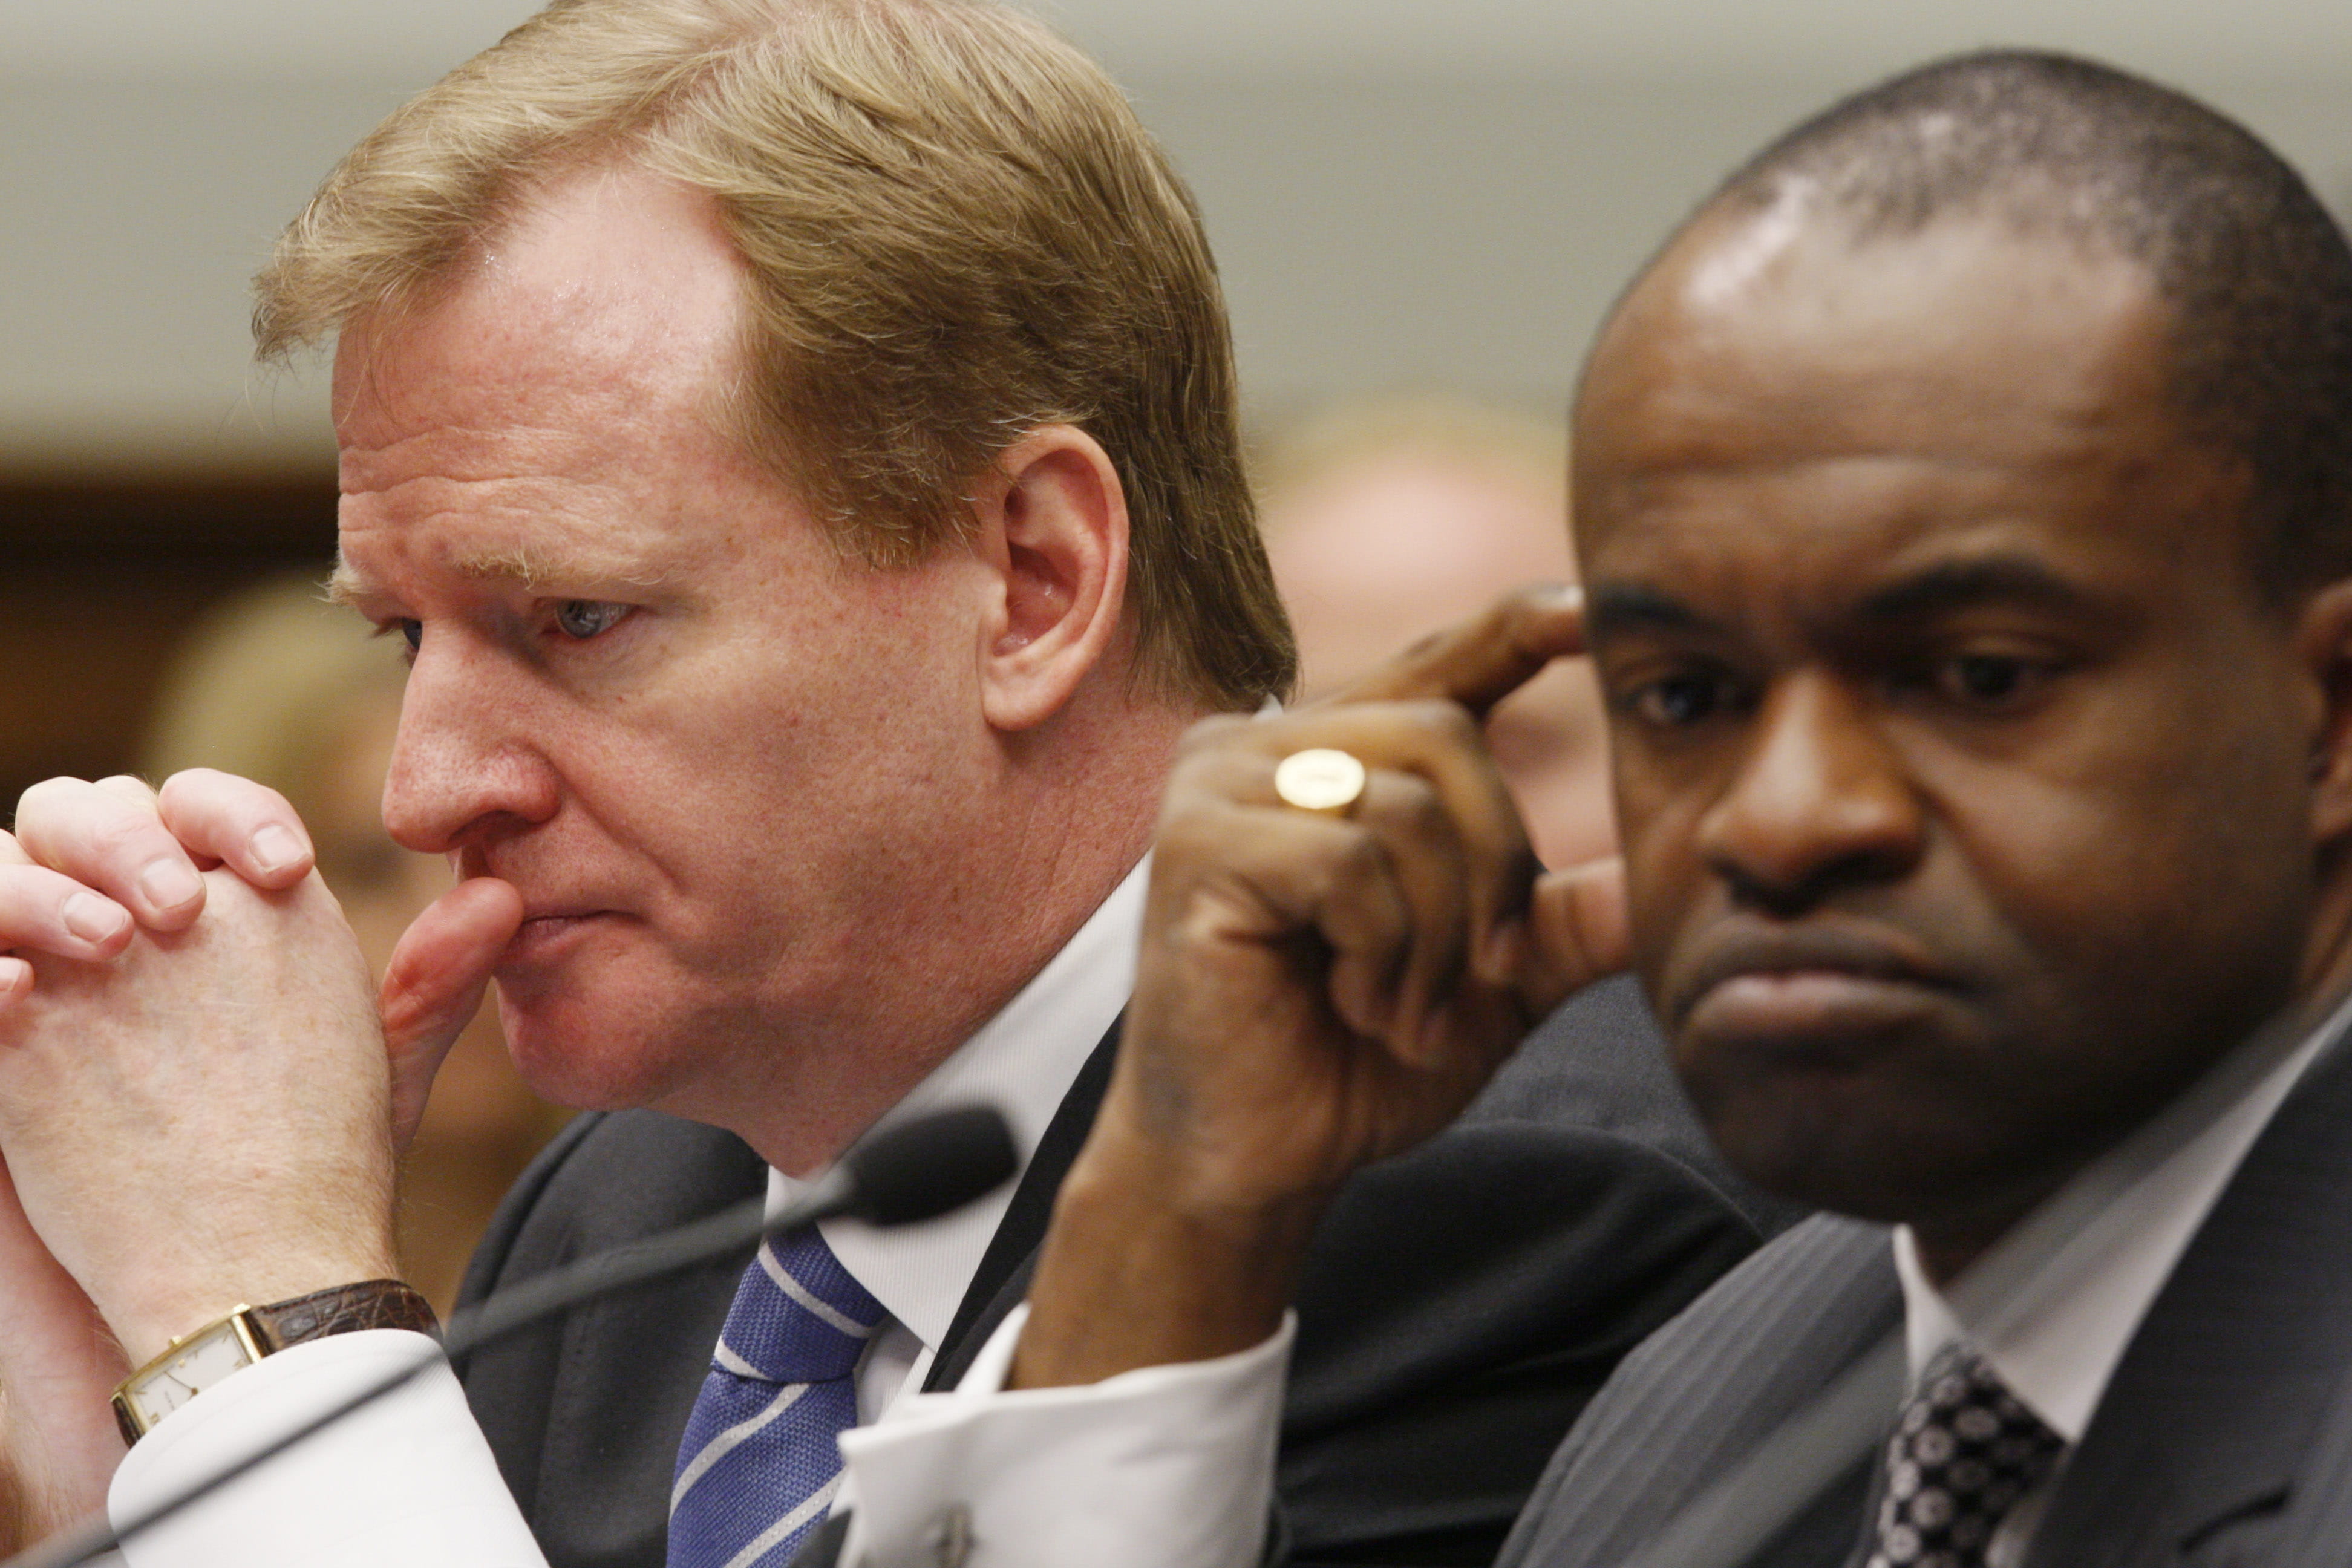 NFL commissioner Roger Goodell and NFL Players' Assn. executive director DeMaurice Smith in 2009.